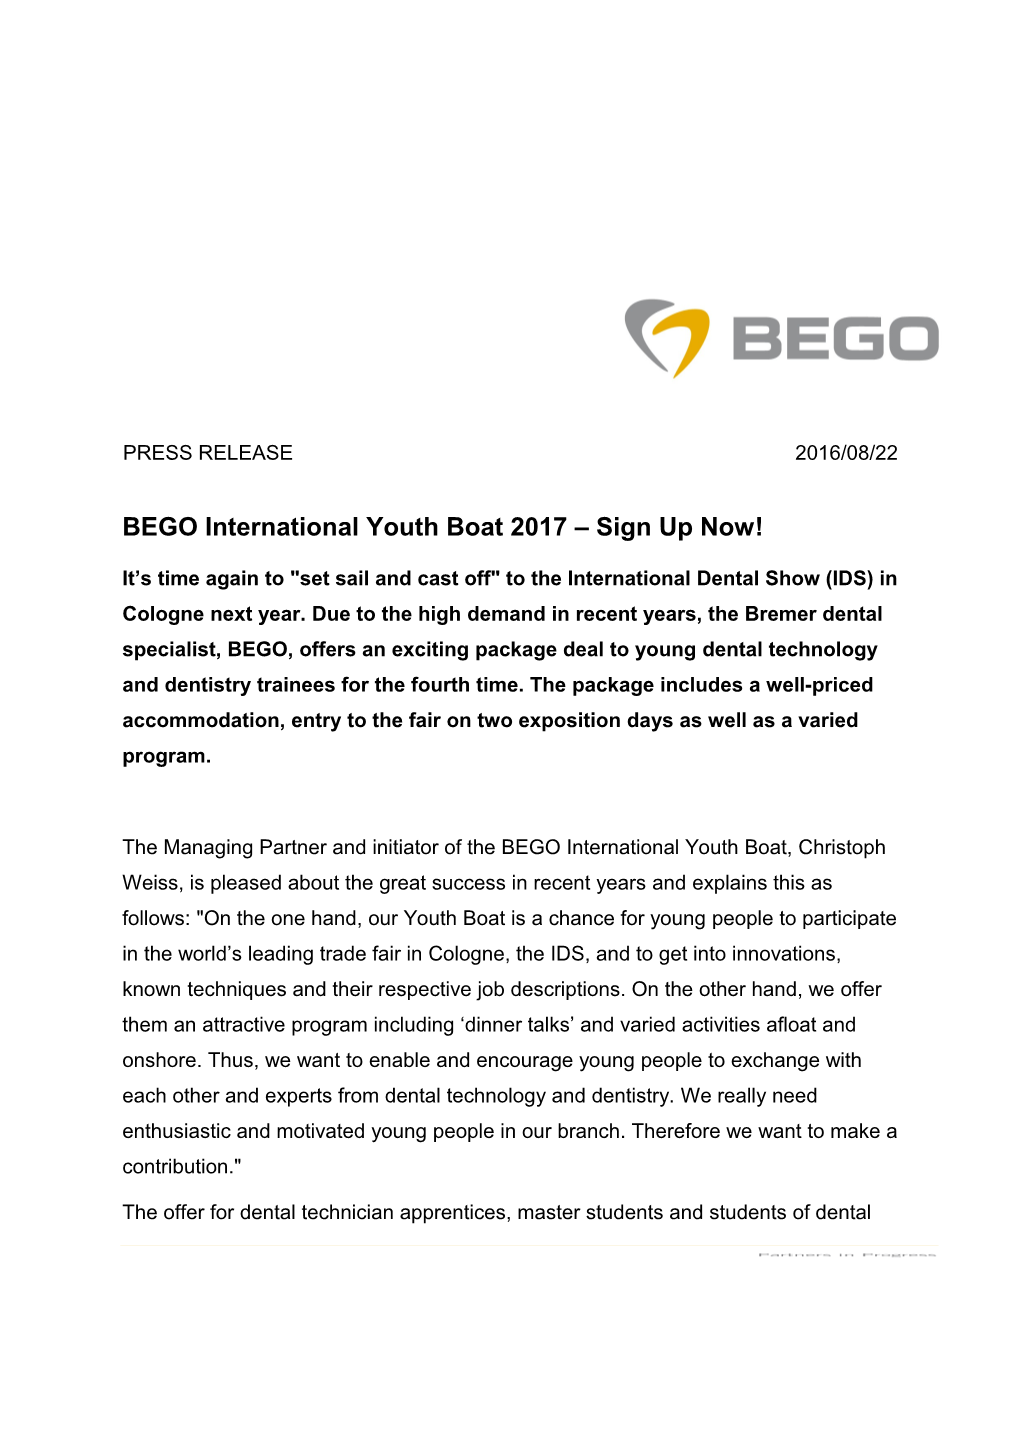 BEGO International Youth Boat 2017 Sign up Now!